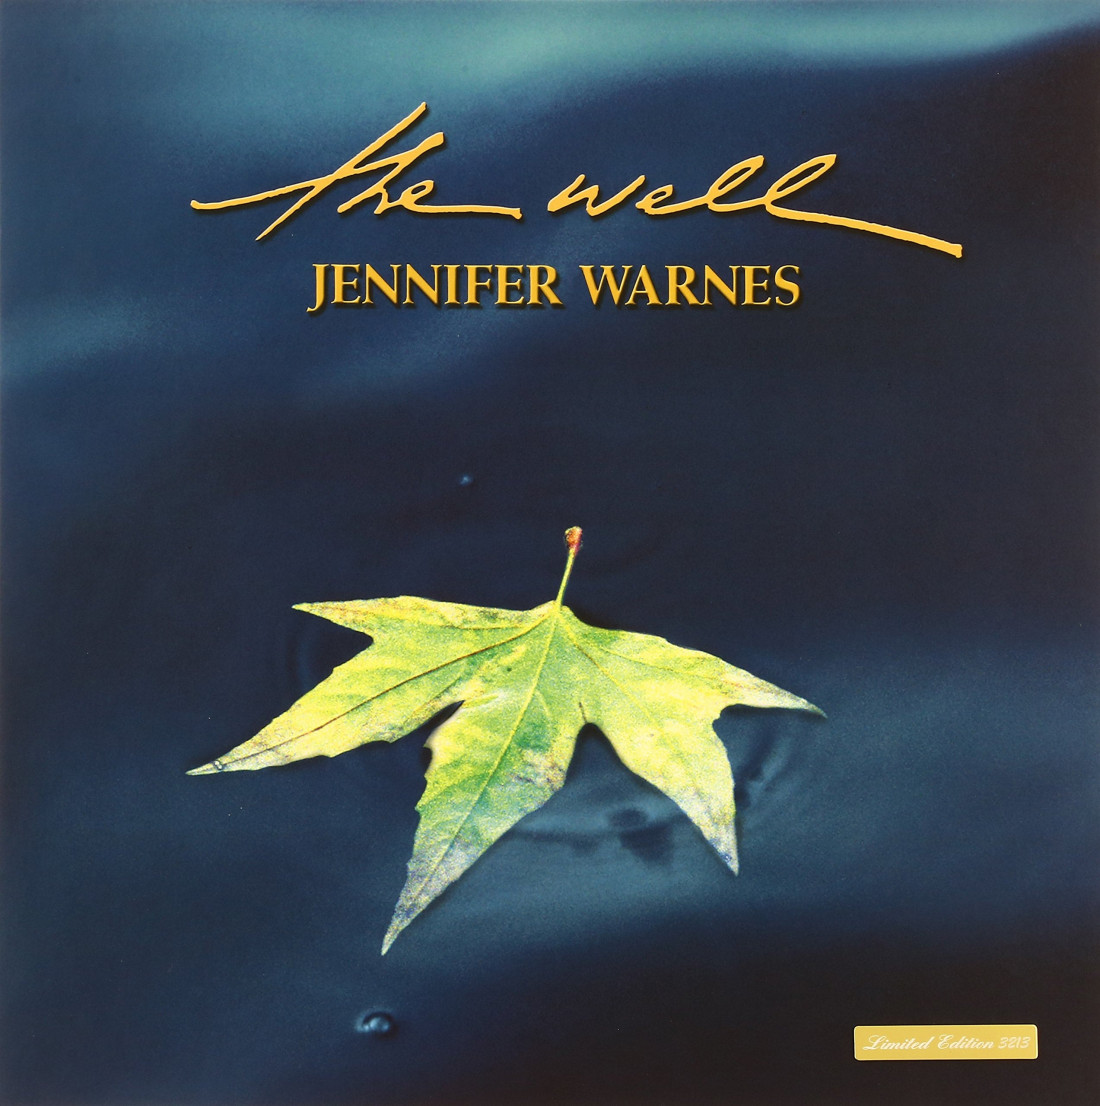 [Jennifer Warnes] And So It Goes (그렇게 계속 될 거예요) (The Well) Photo-Image